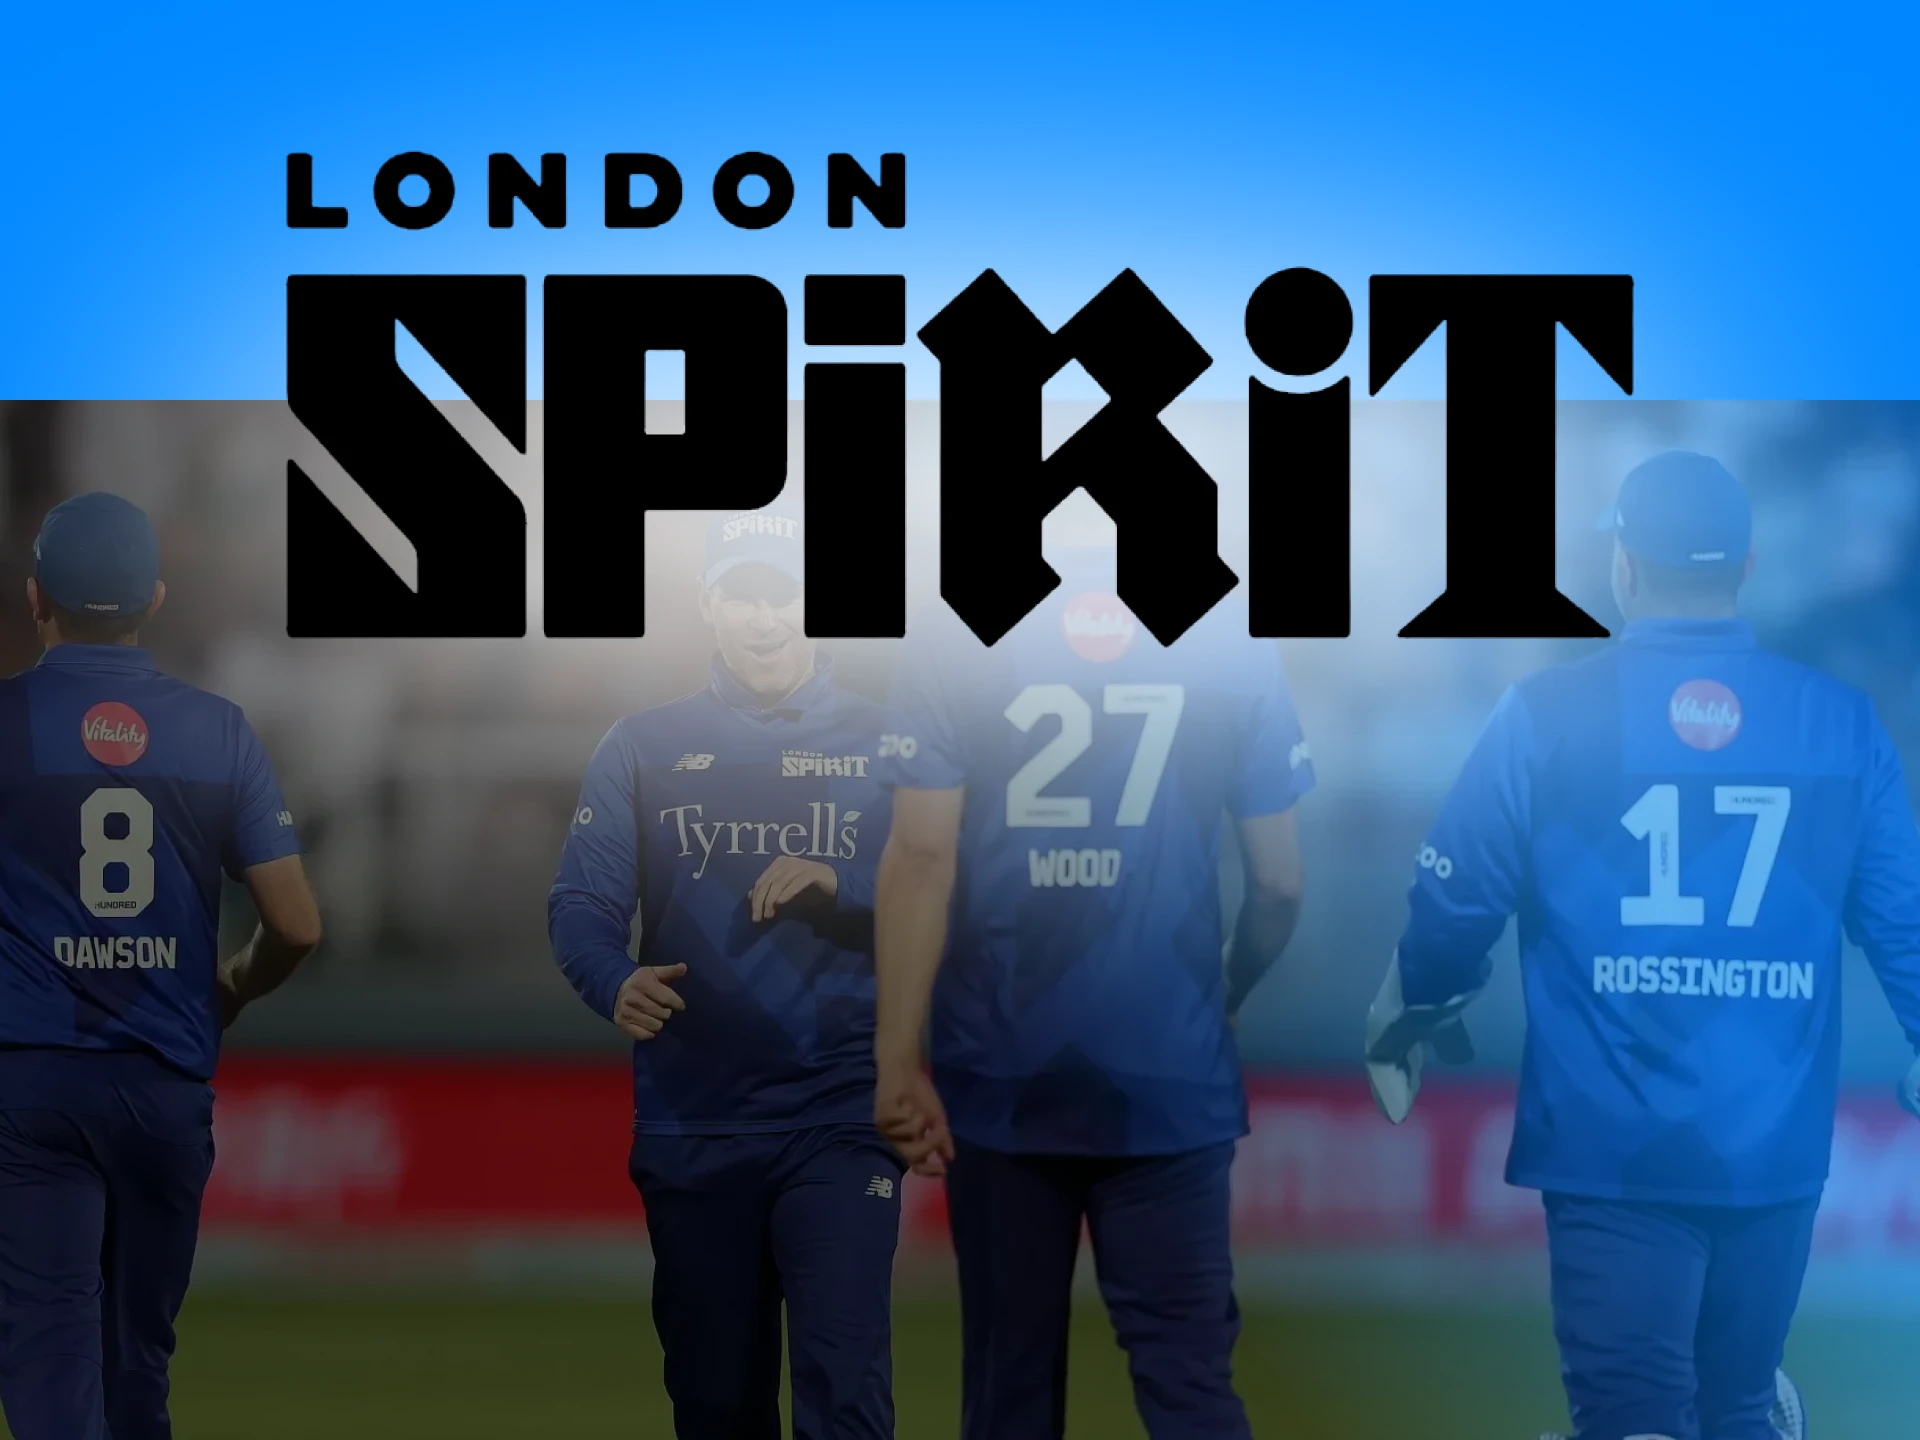 London Spirit provide exciting matches to watch.